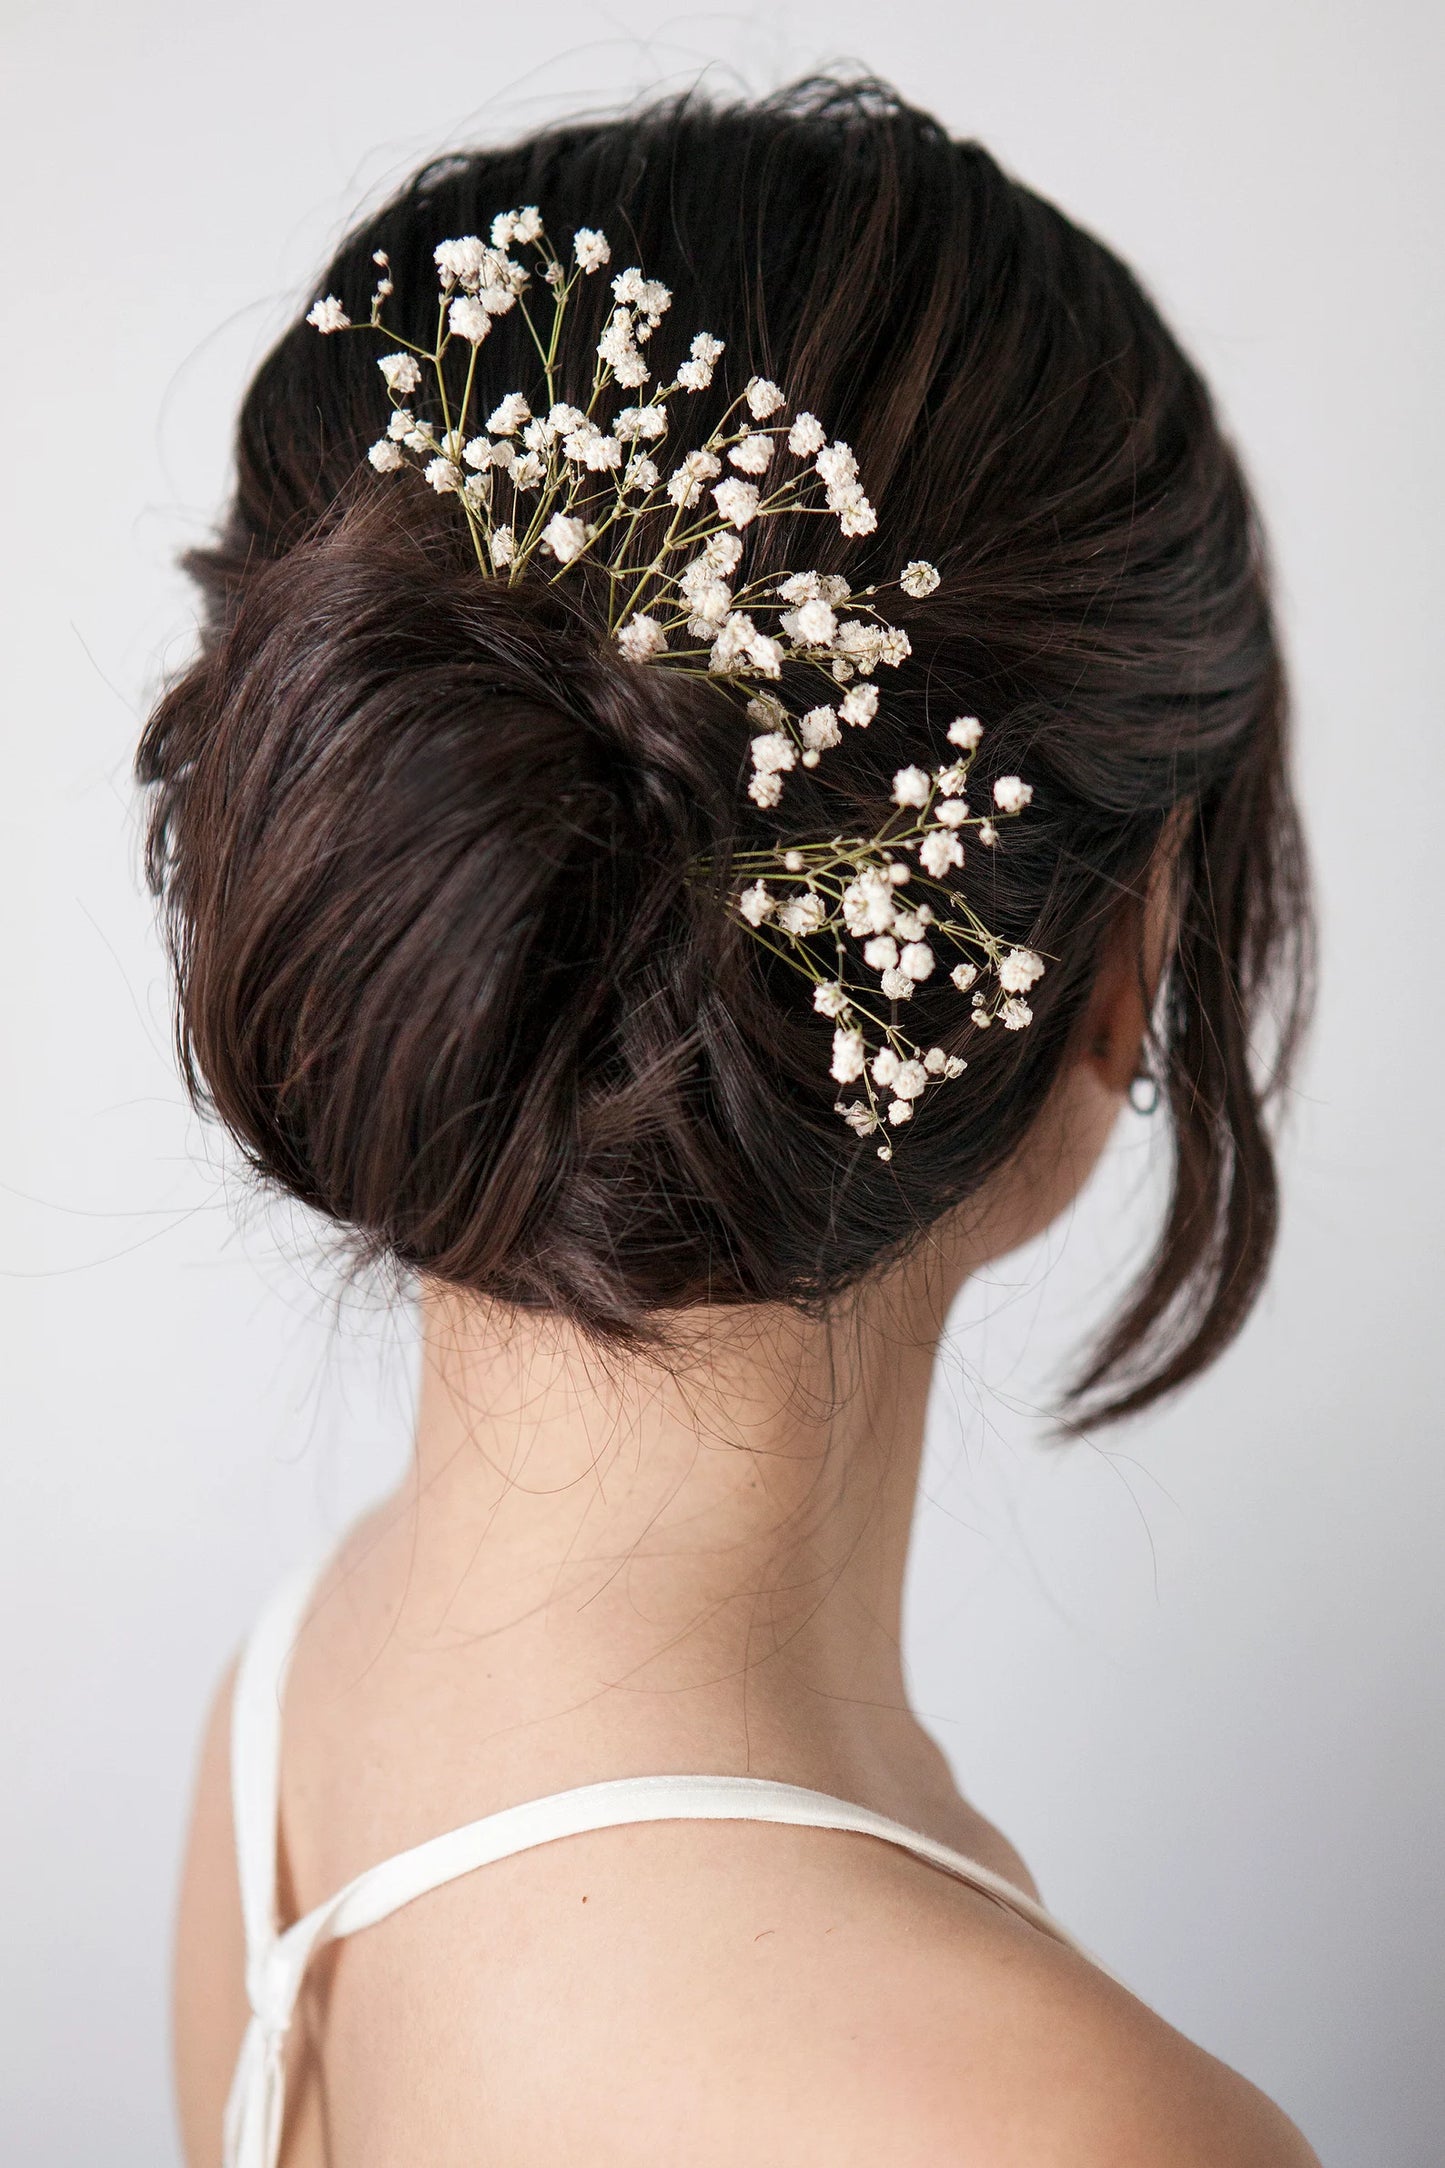 Big Spread-out Dried Baby's Breath Hair Pins